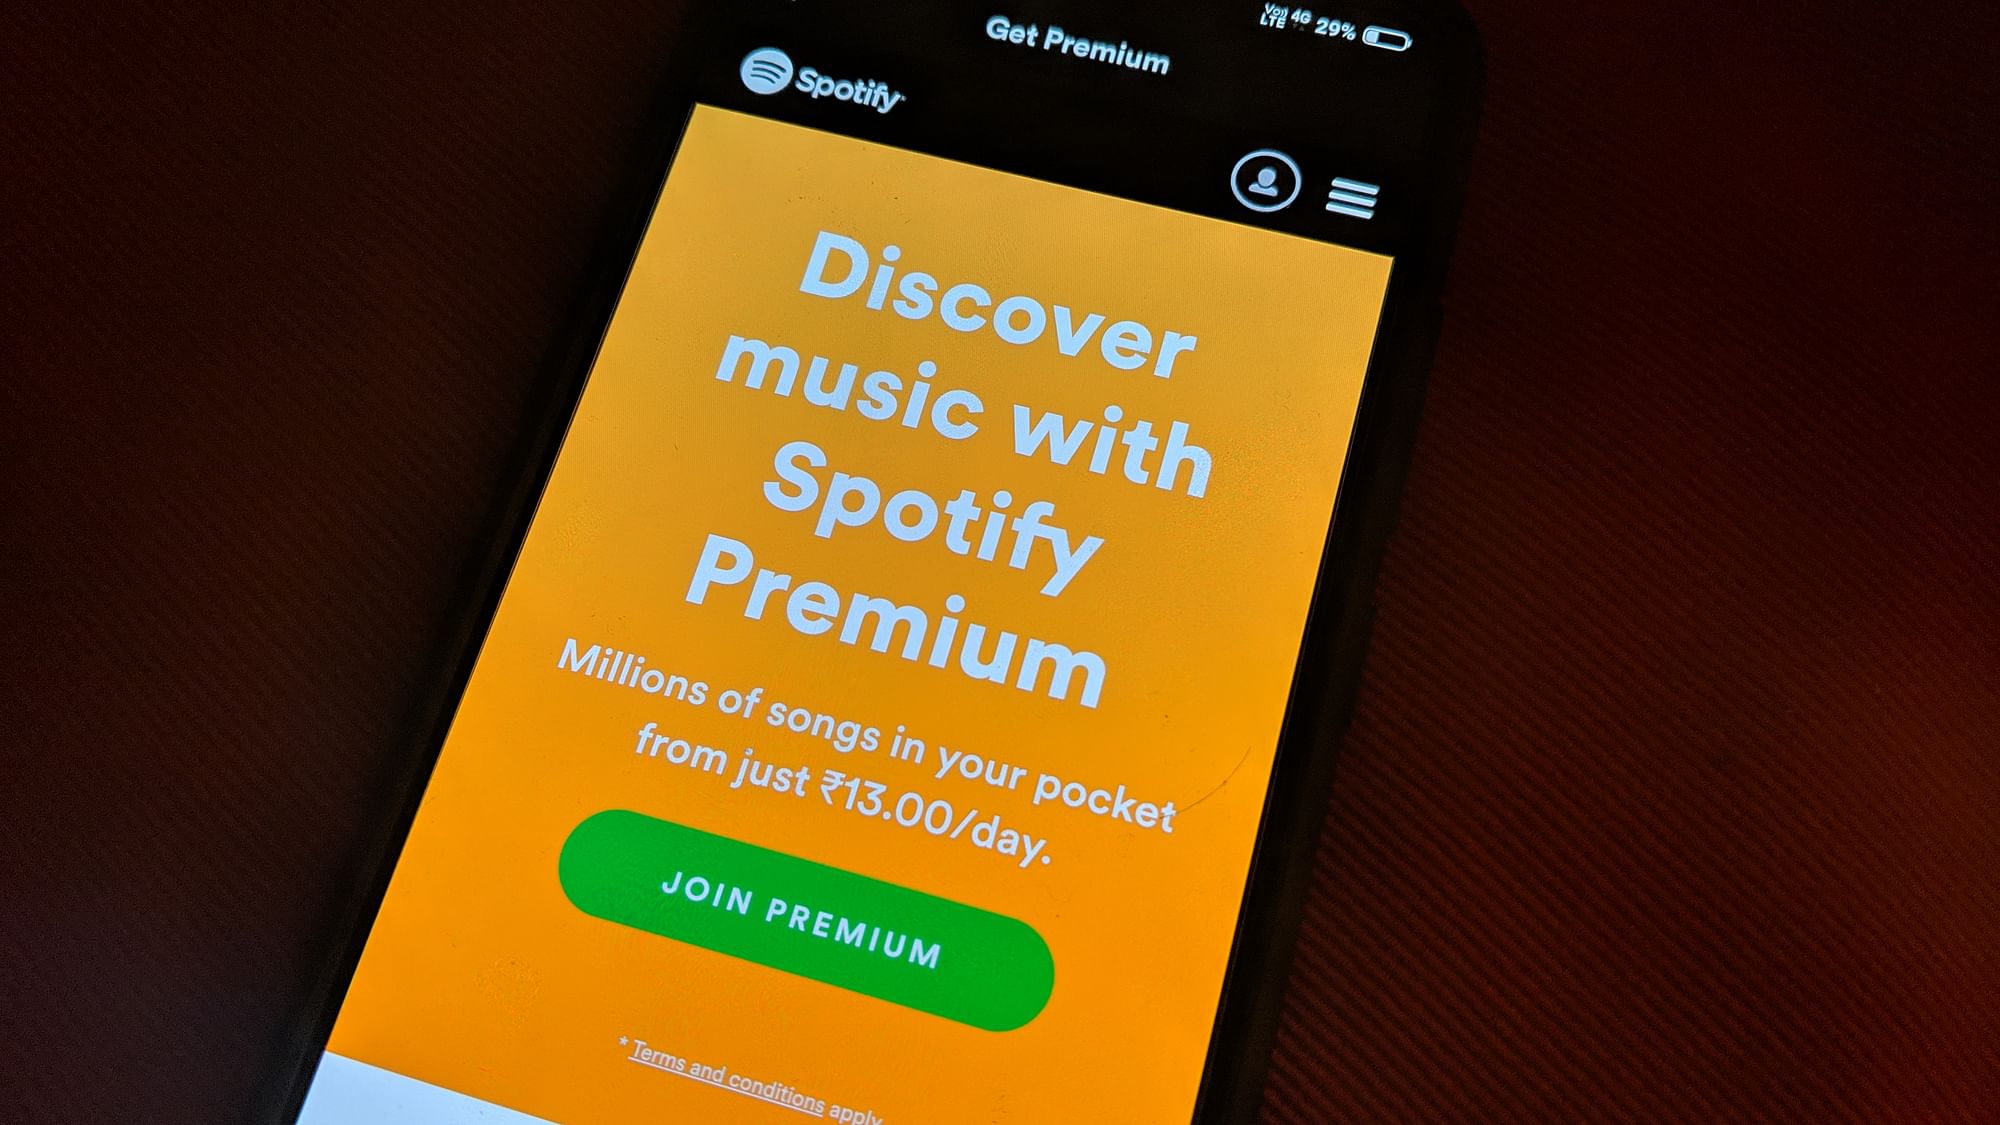 Spotify’s music catalogue in India was missing a lot of popular artists.